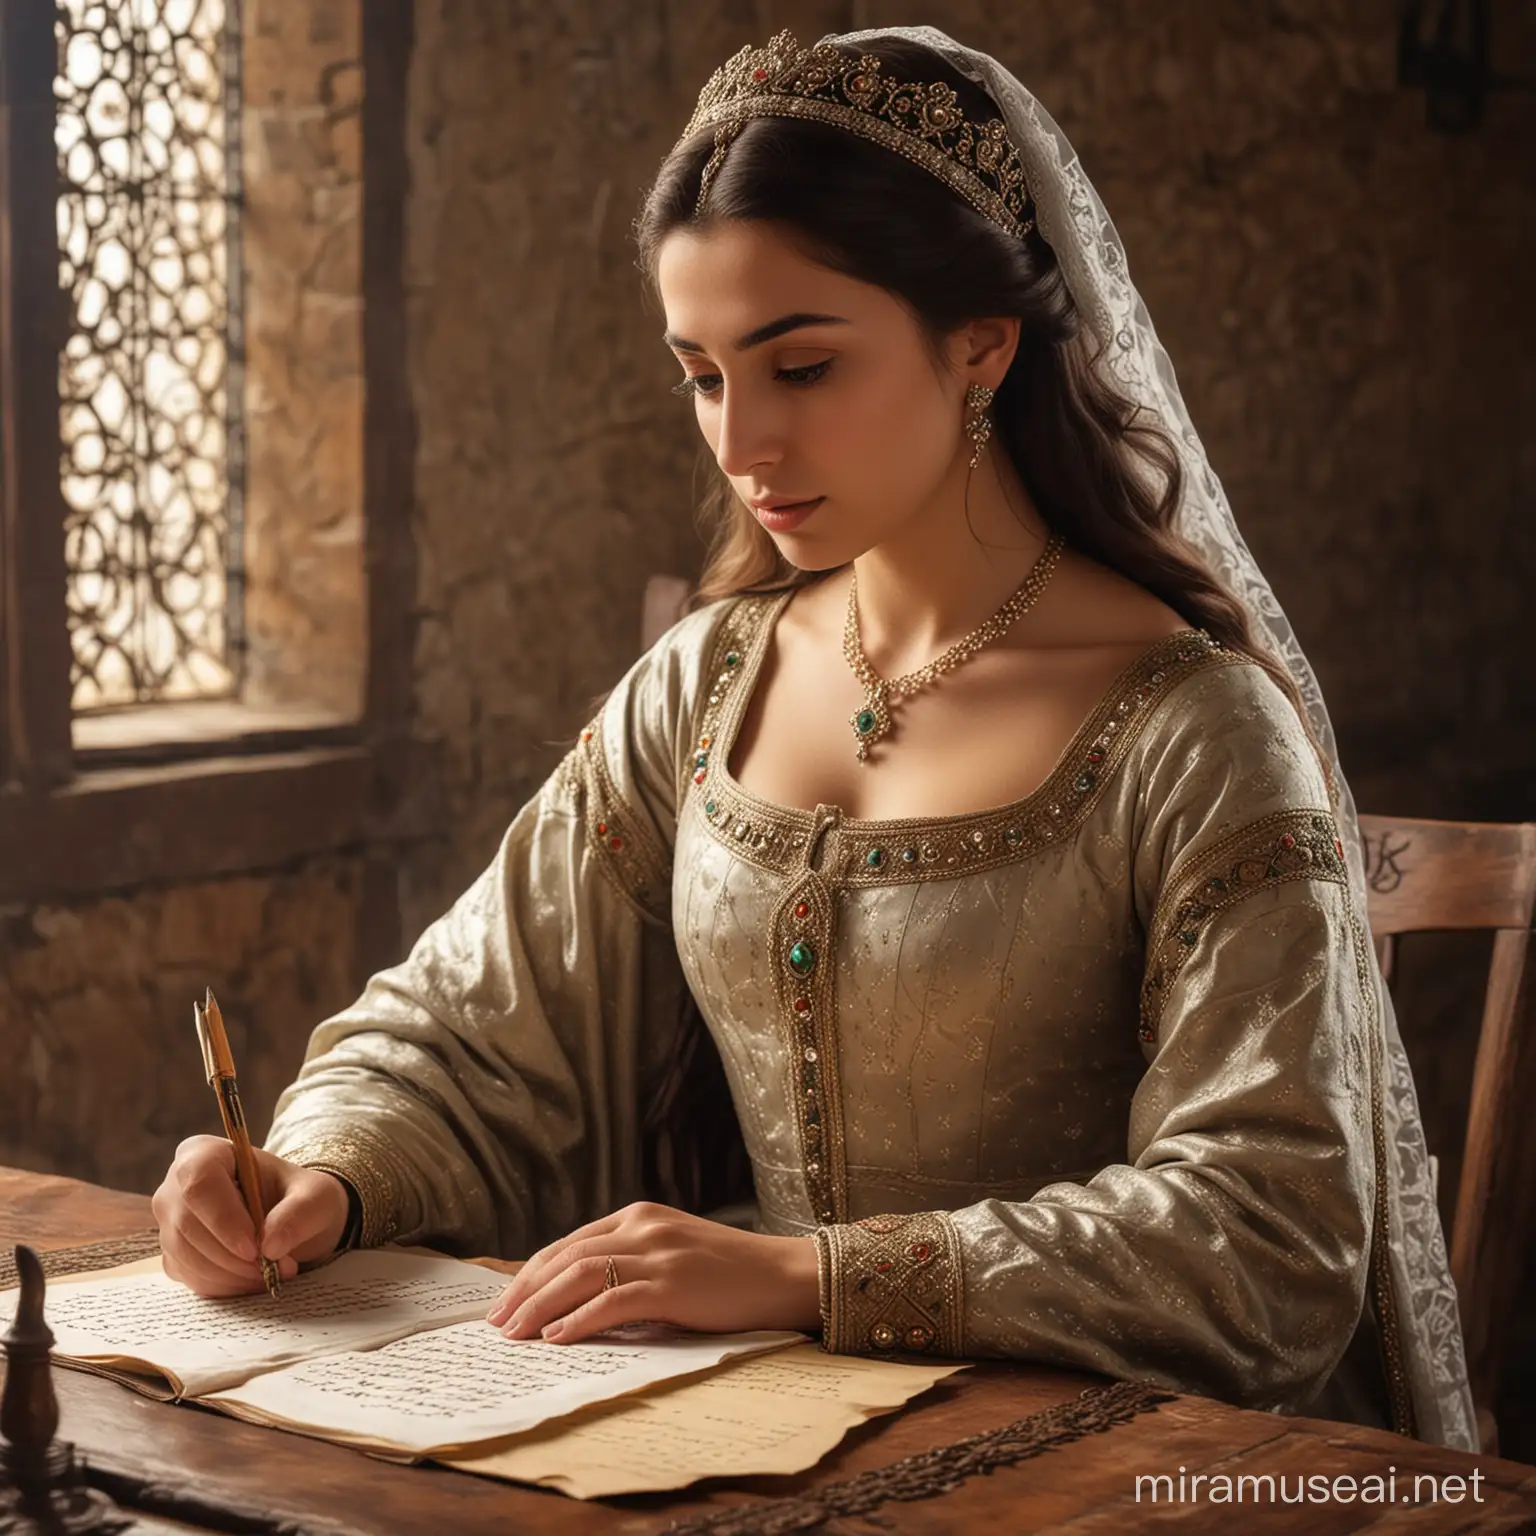 Generate a 12 century princes Nestani from Georgia, She is very beautiful. She is writing letter. And watching her letter how she is writing.